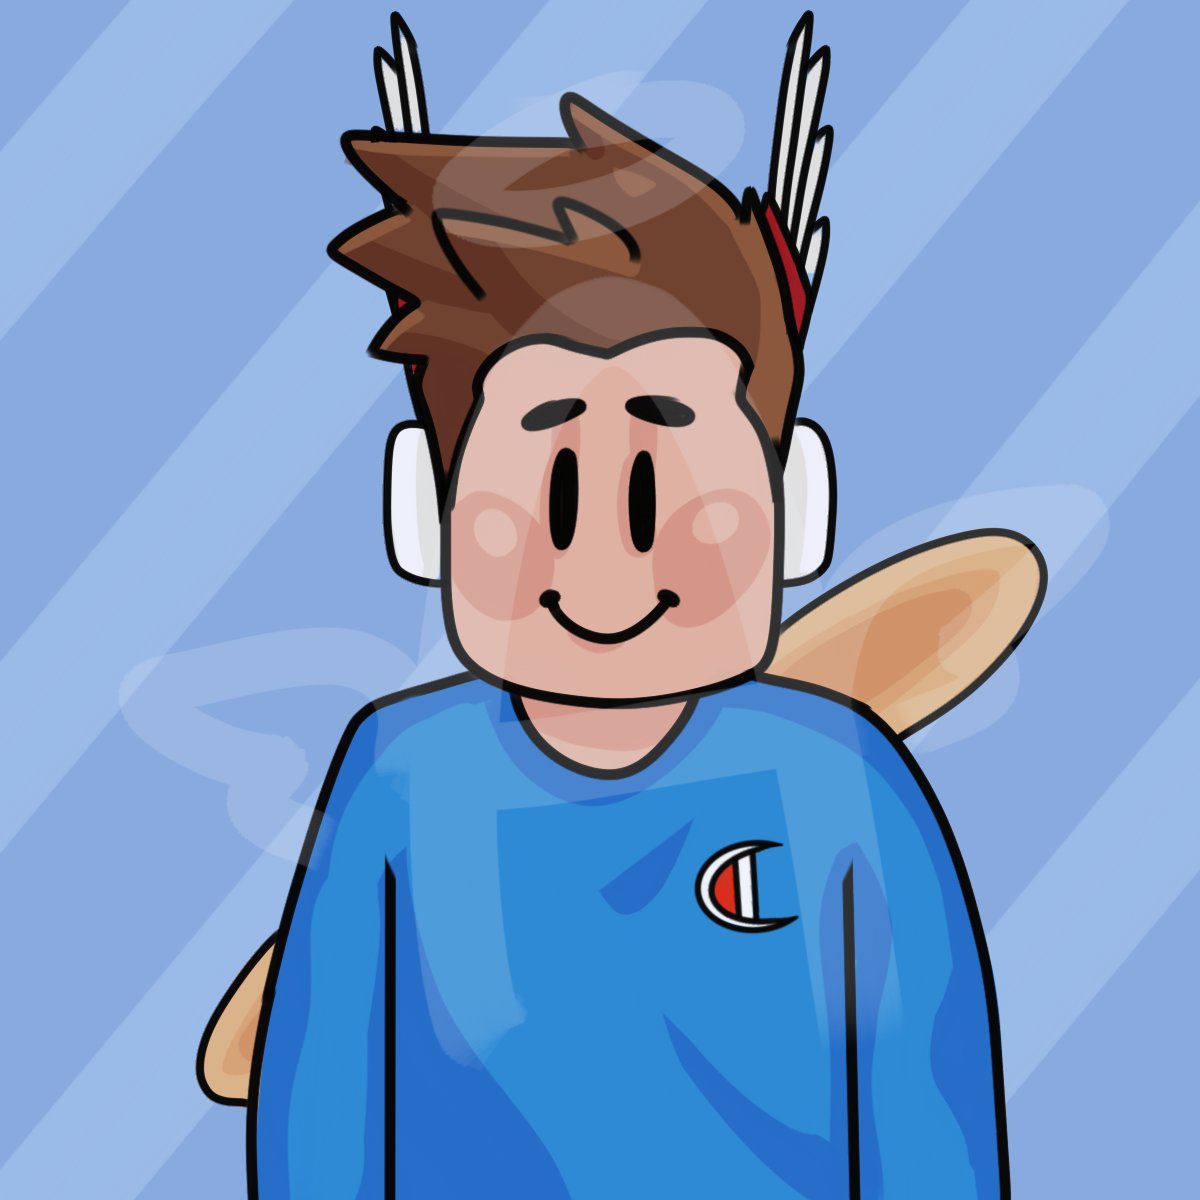 Robloxpfp Hashtag On Twitter - roblox profile picture animation